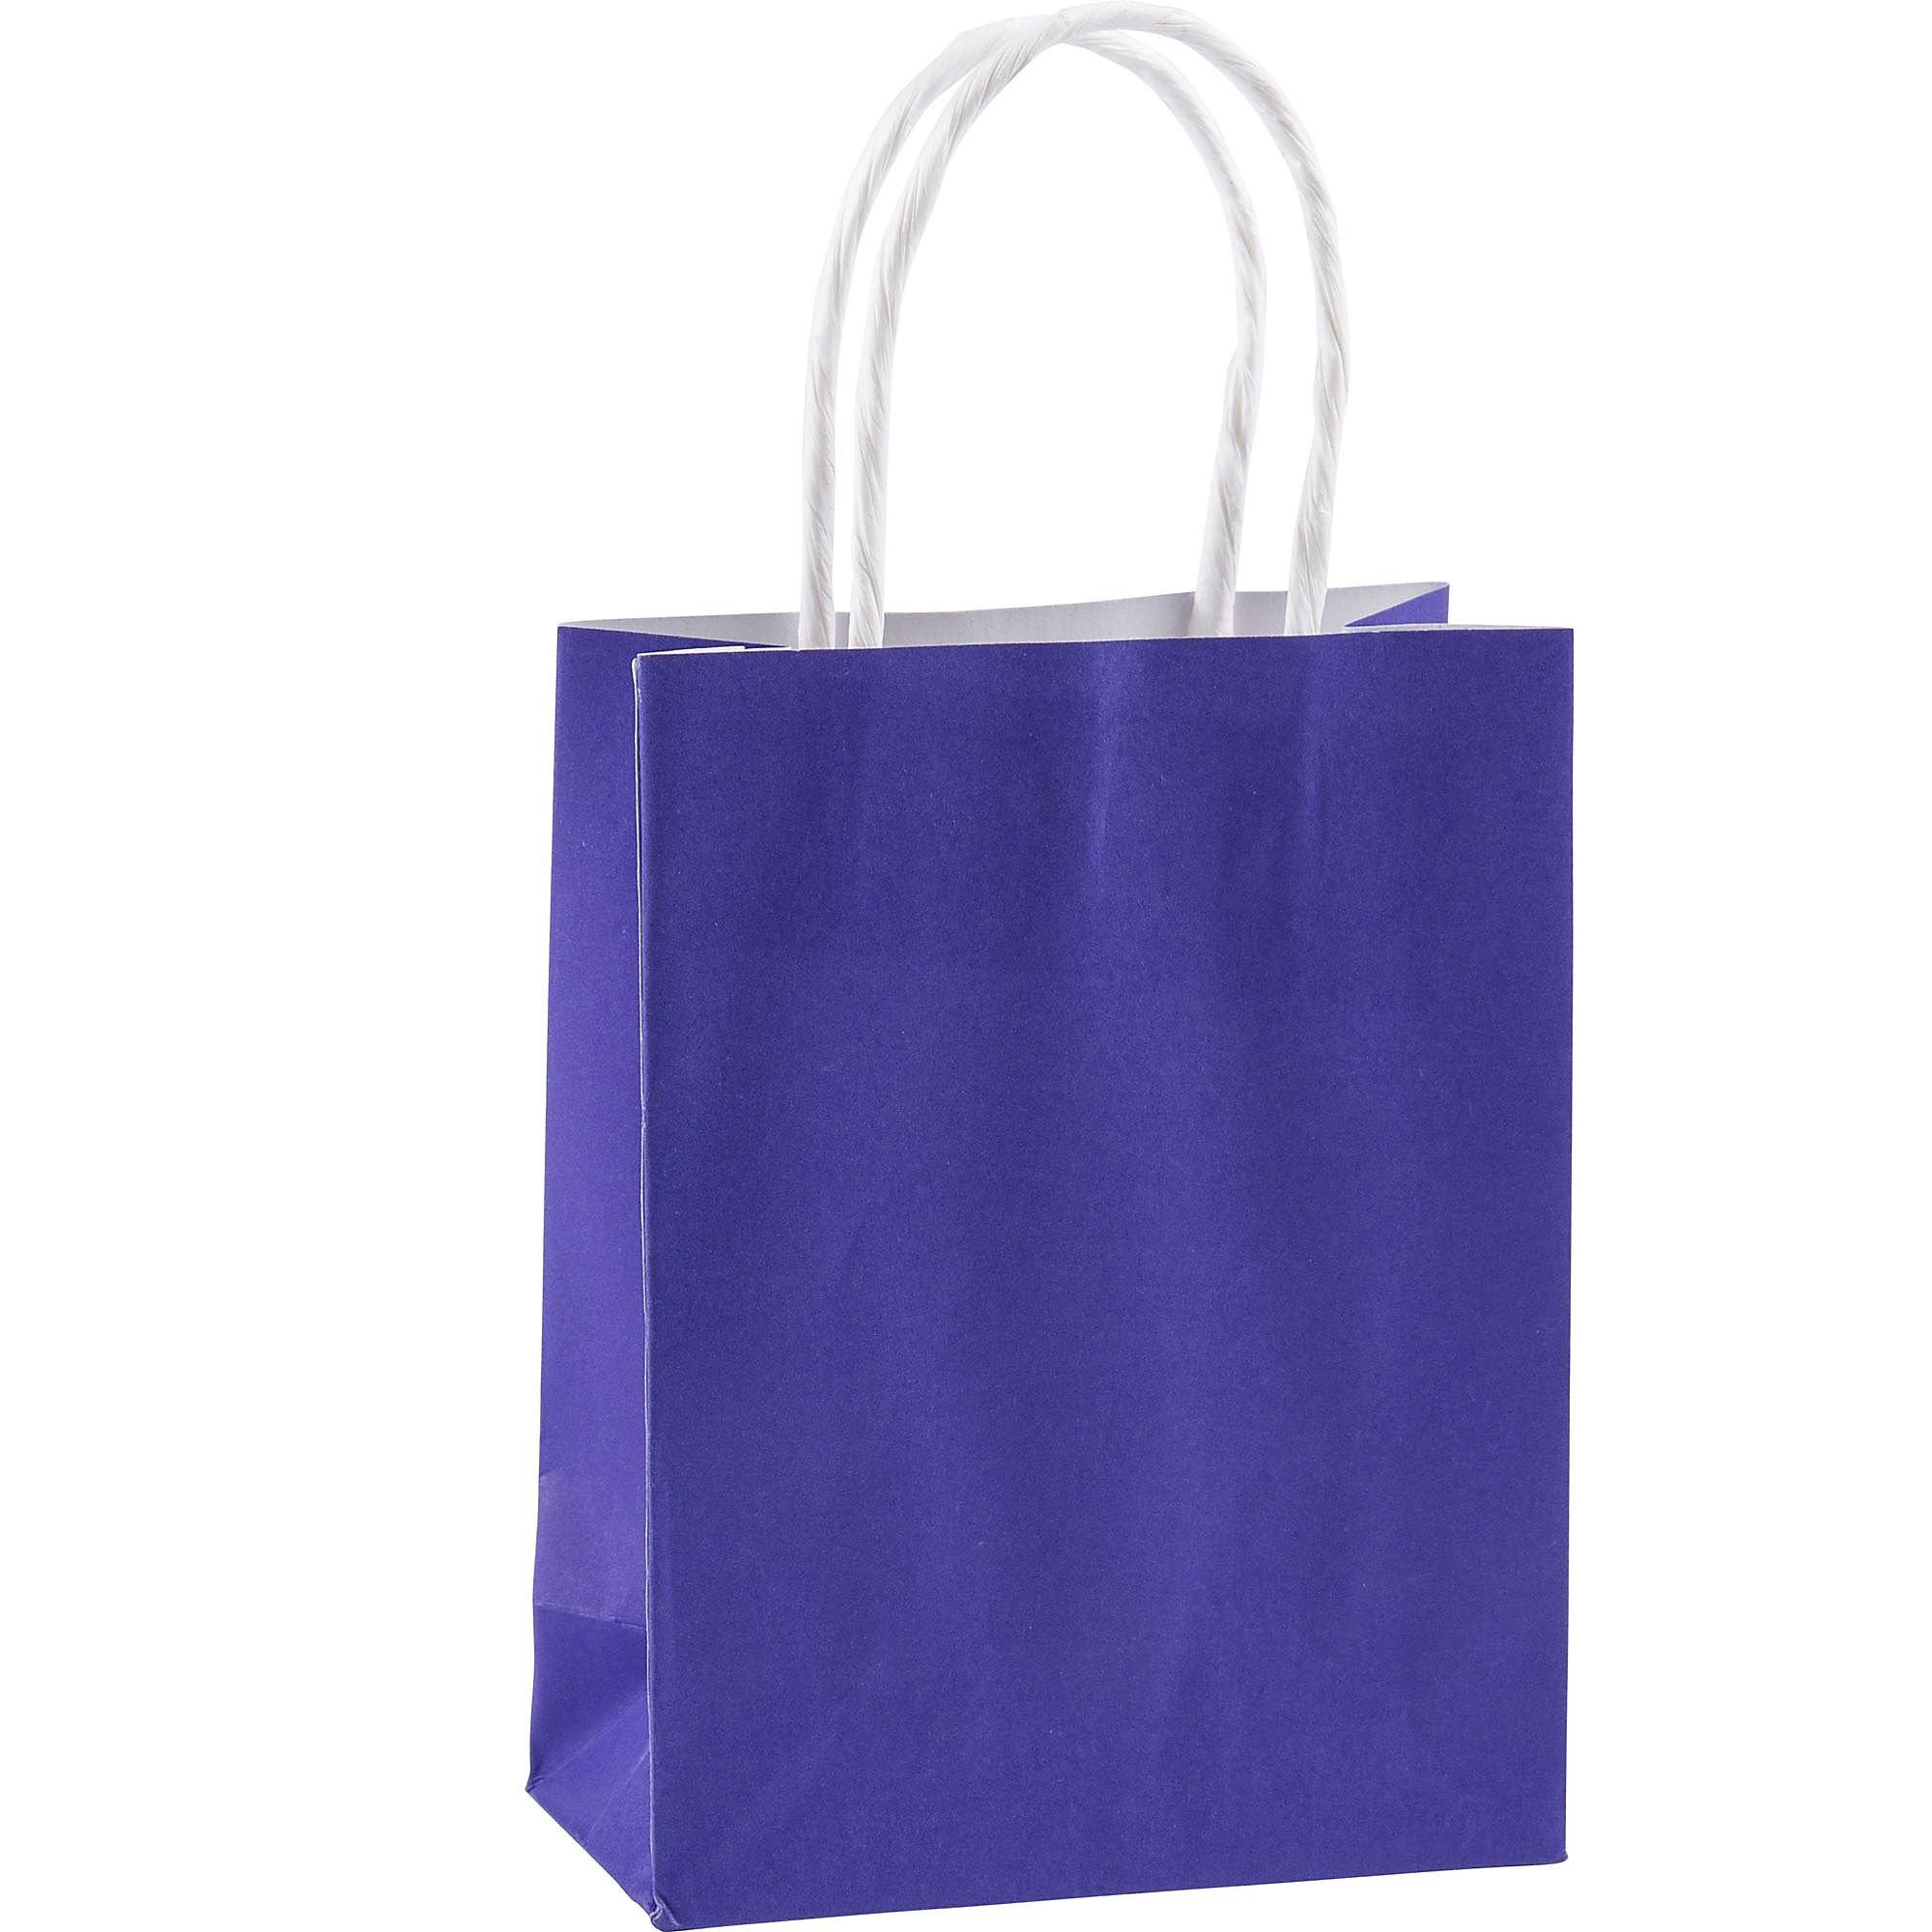 Purple Q Crafts Colorful Kraft Paper Bags with Handles for Party Favors and Goodie Bags, 6 Colors 24-Pack, Size: 6”x3”x8”, Multicolor